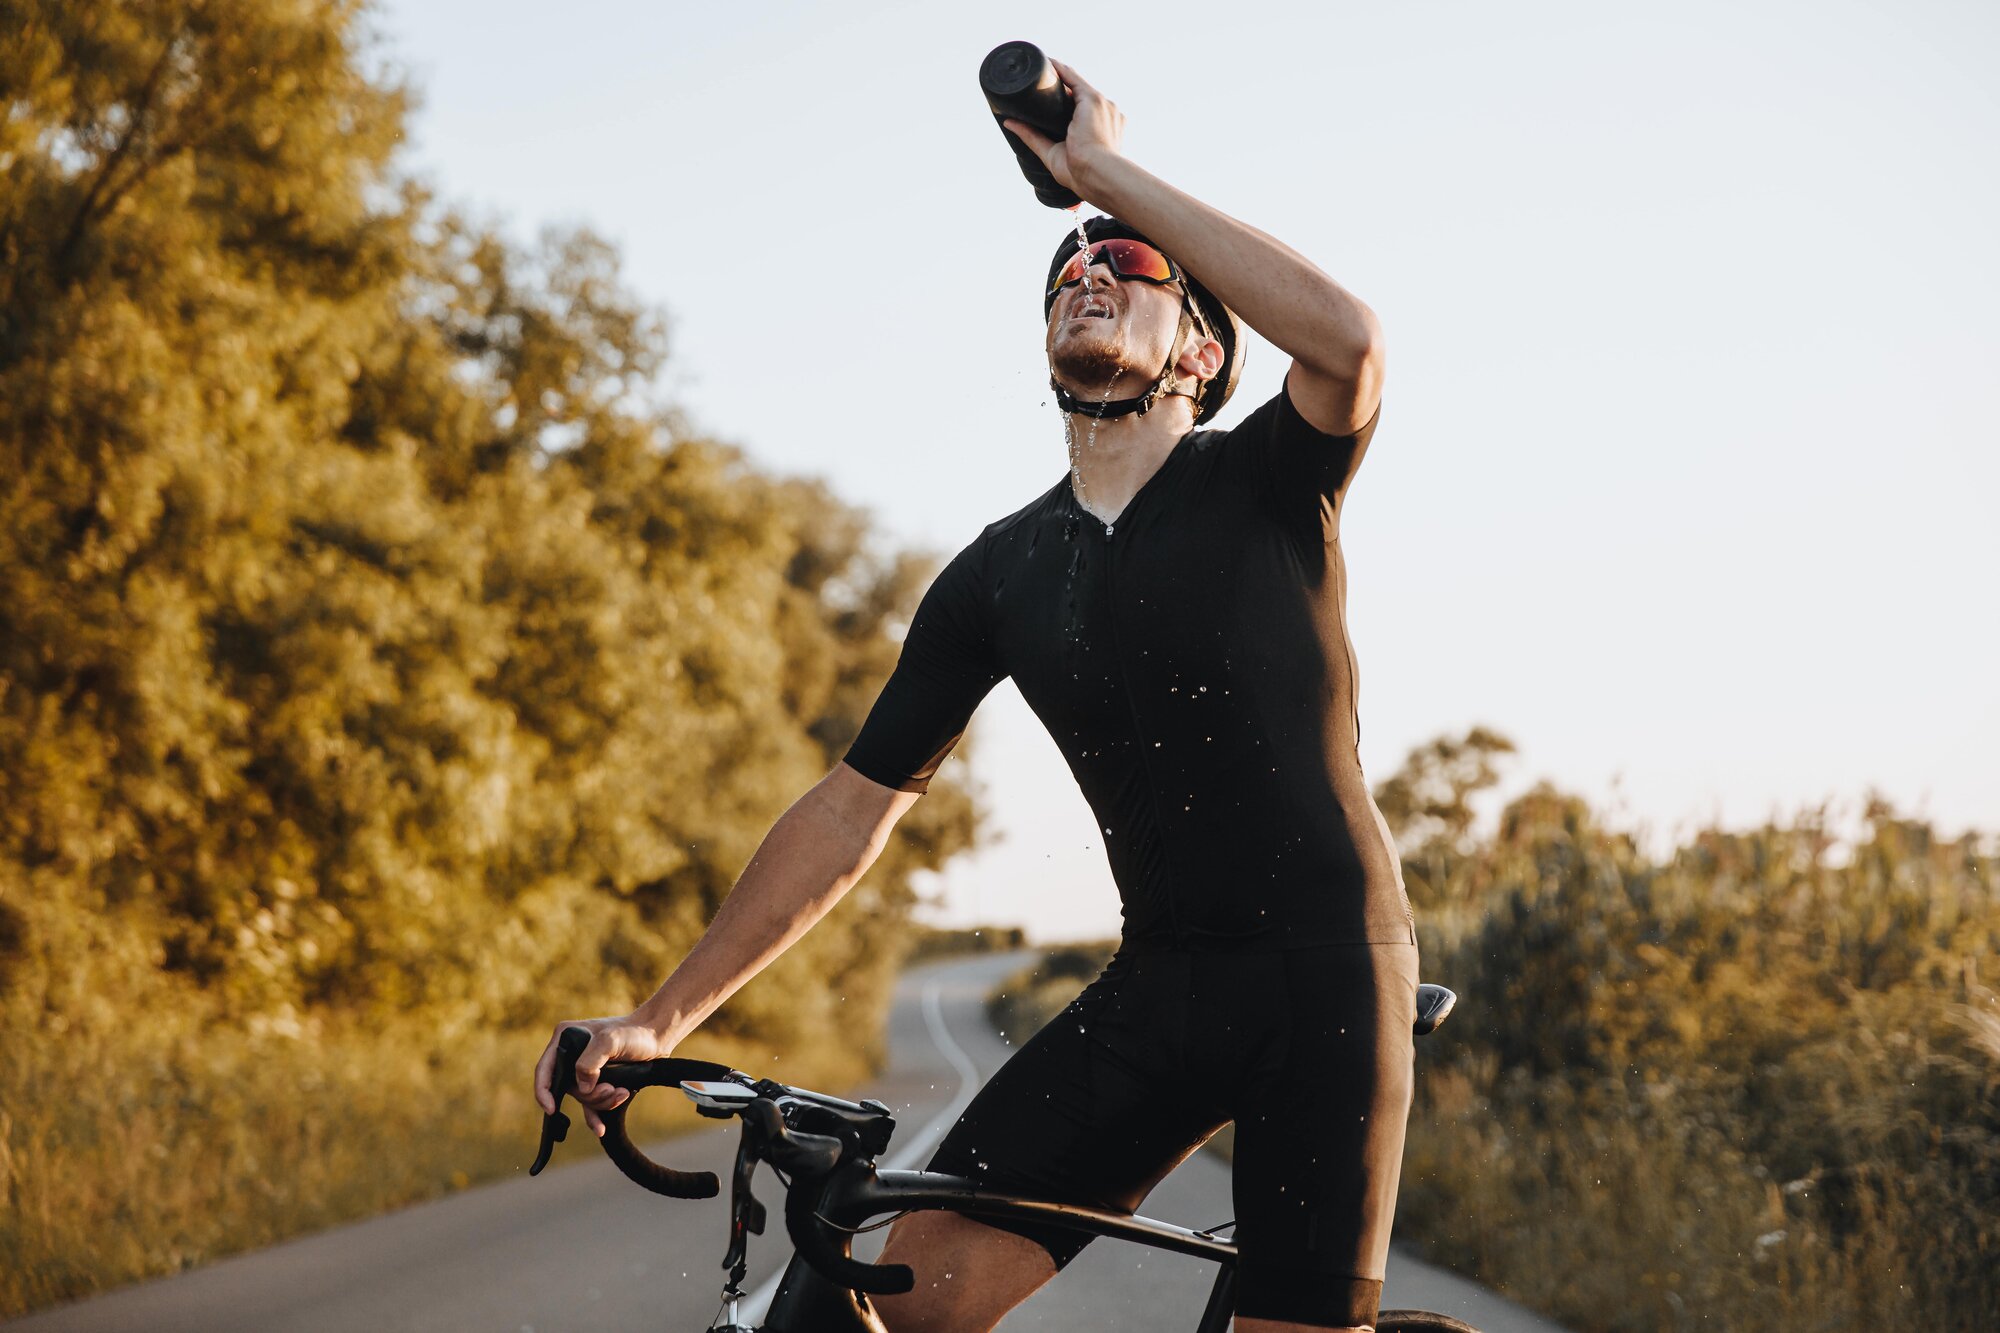 hydrate while cycling